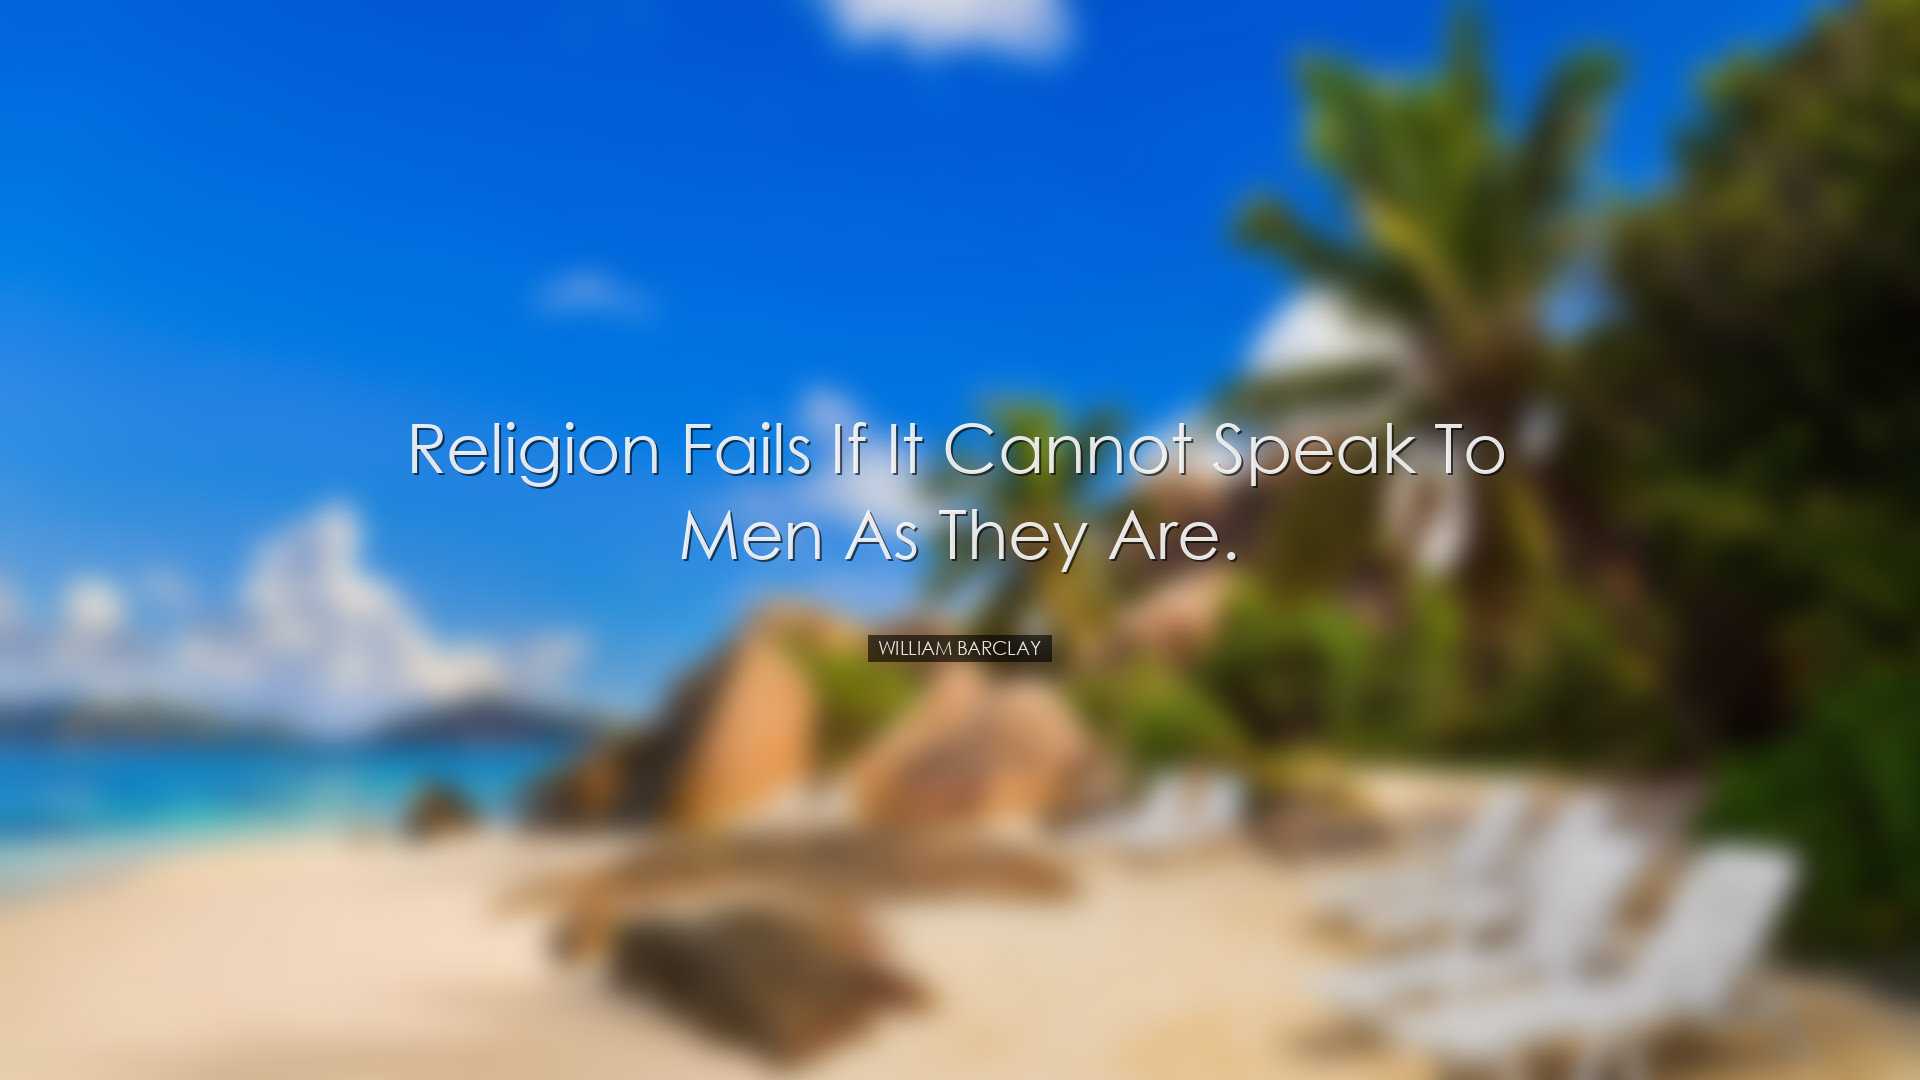 Religion fails if it cannot speak to men as they are. - William Ba